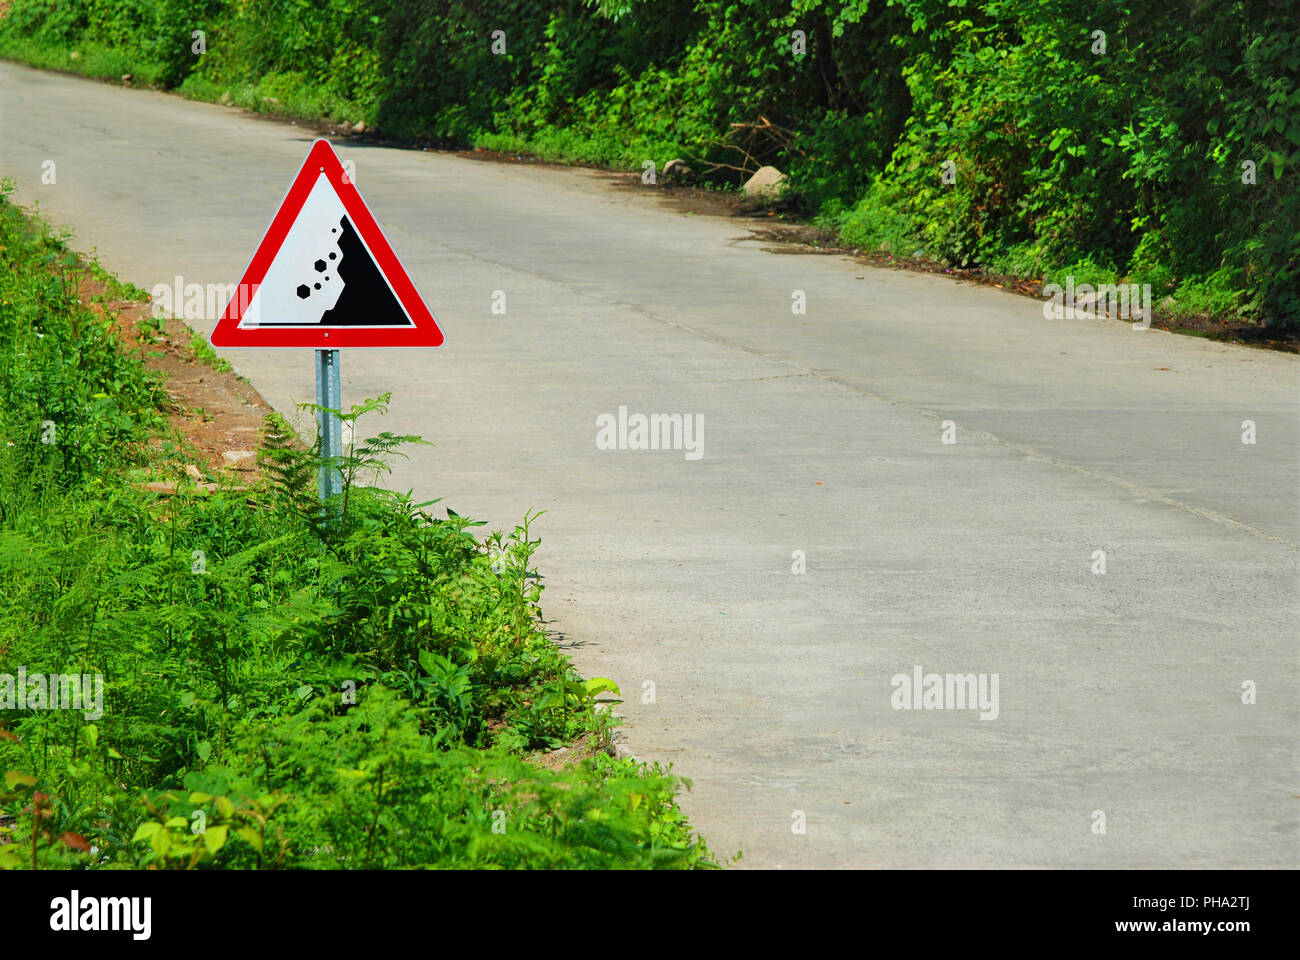 Rock Warning Sign On The Mountain Road Traffic Sign Stock Photo Alamy